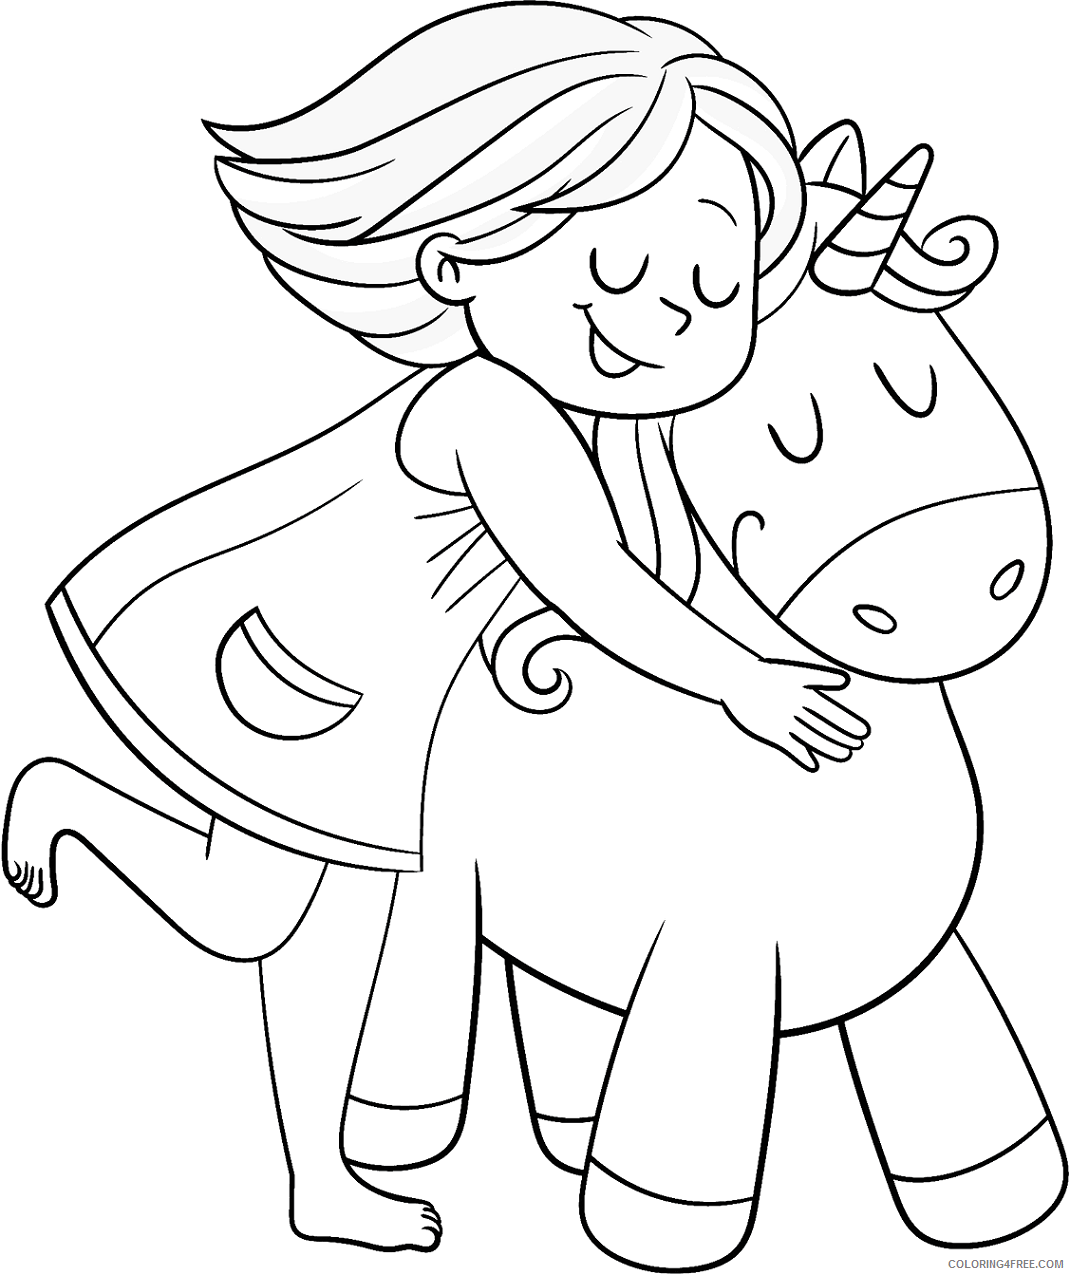 Unicorn Coloring Pages girl with unicorn Printable 2021 6037 Coloring4free